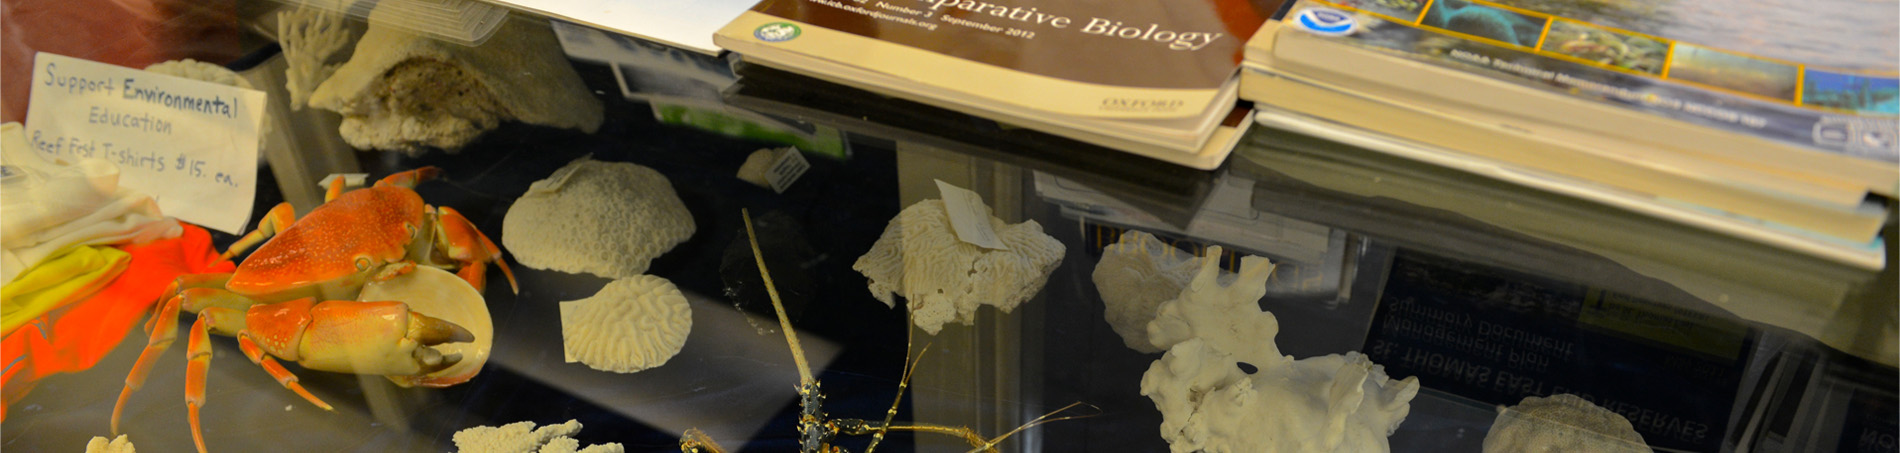 Biology textbook with shells and crabs on display